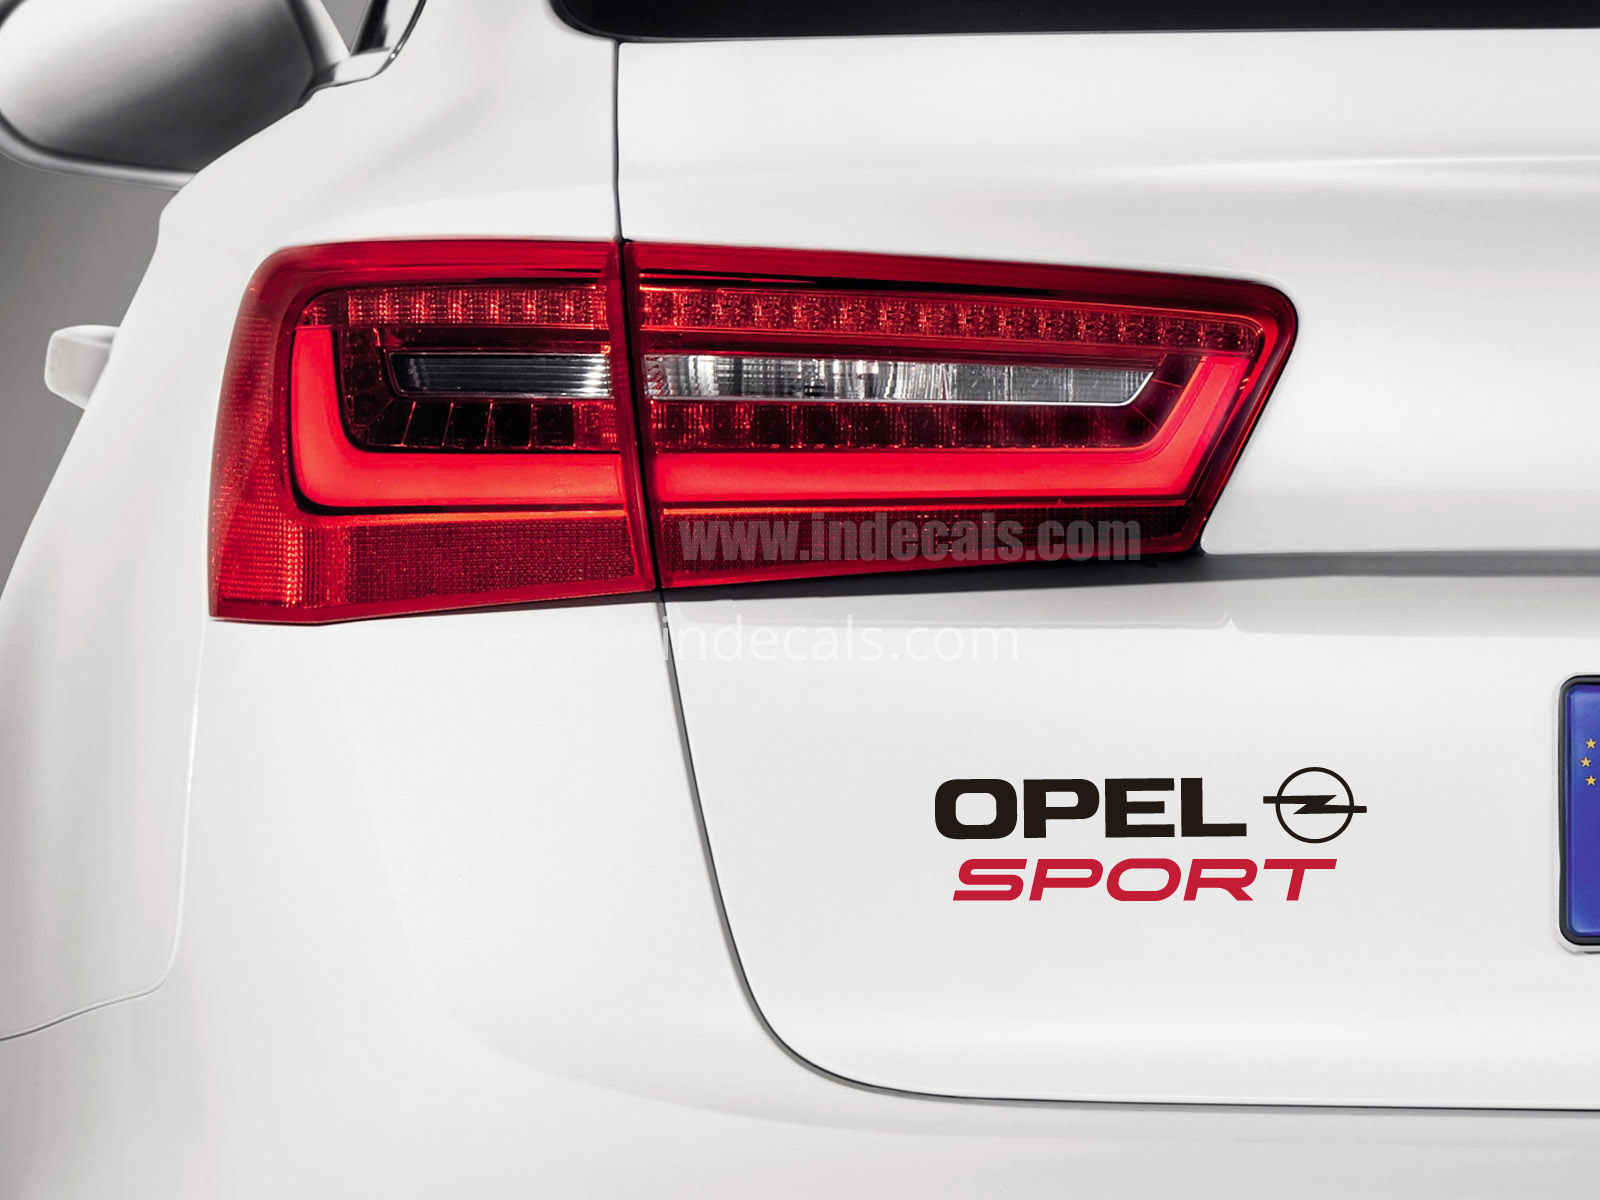 1 x Opel Sports Sticker for Trunk - Black & Red